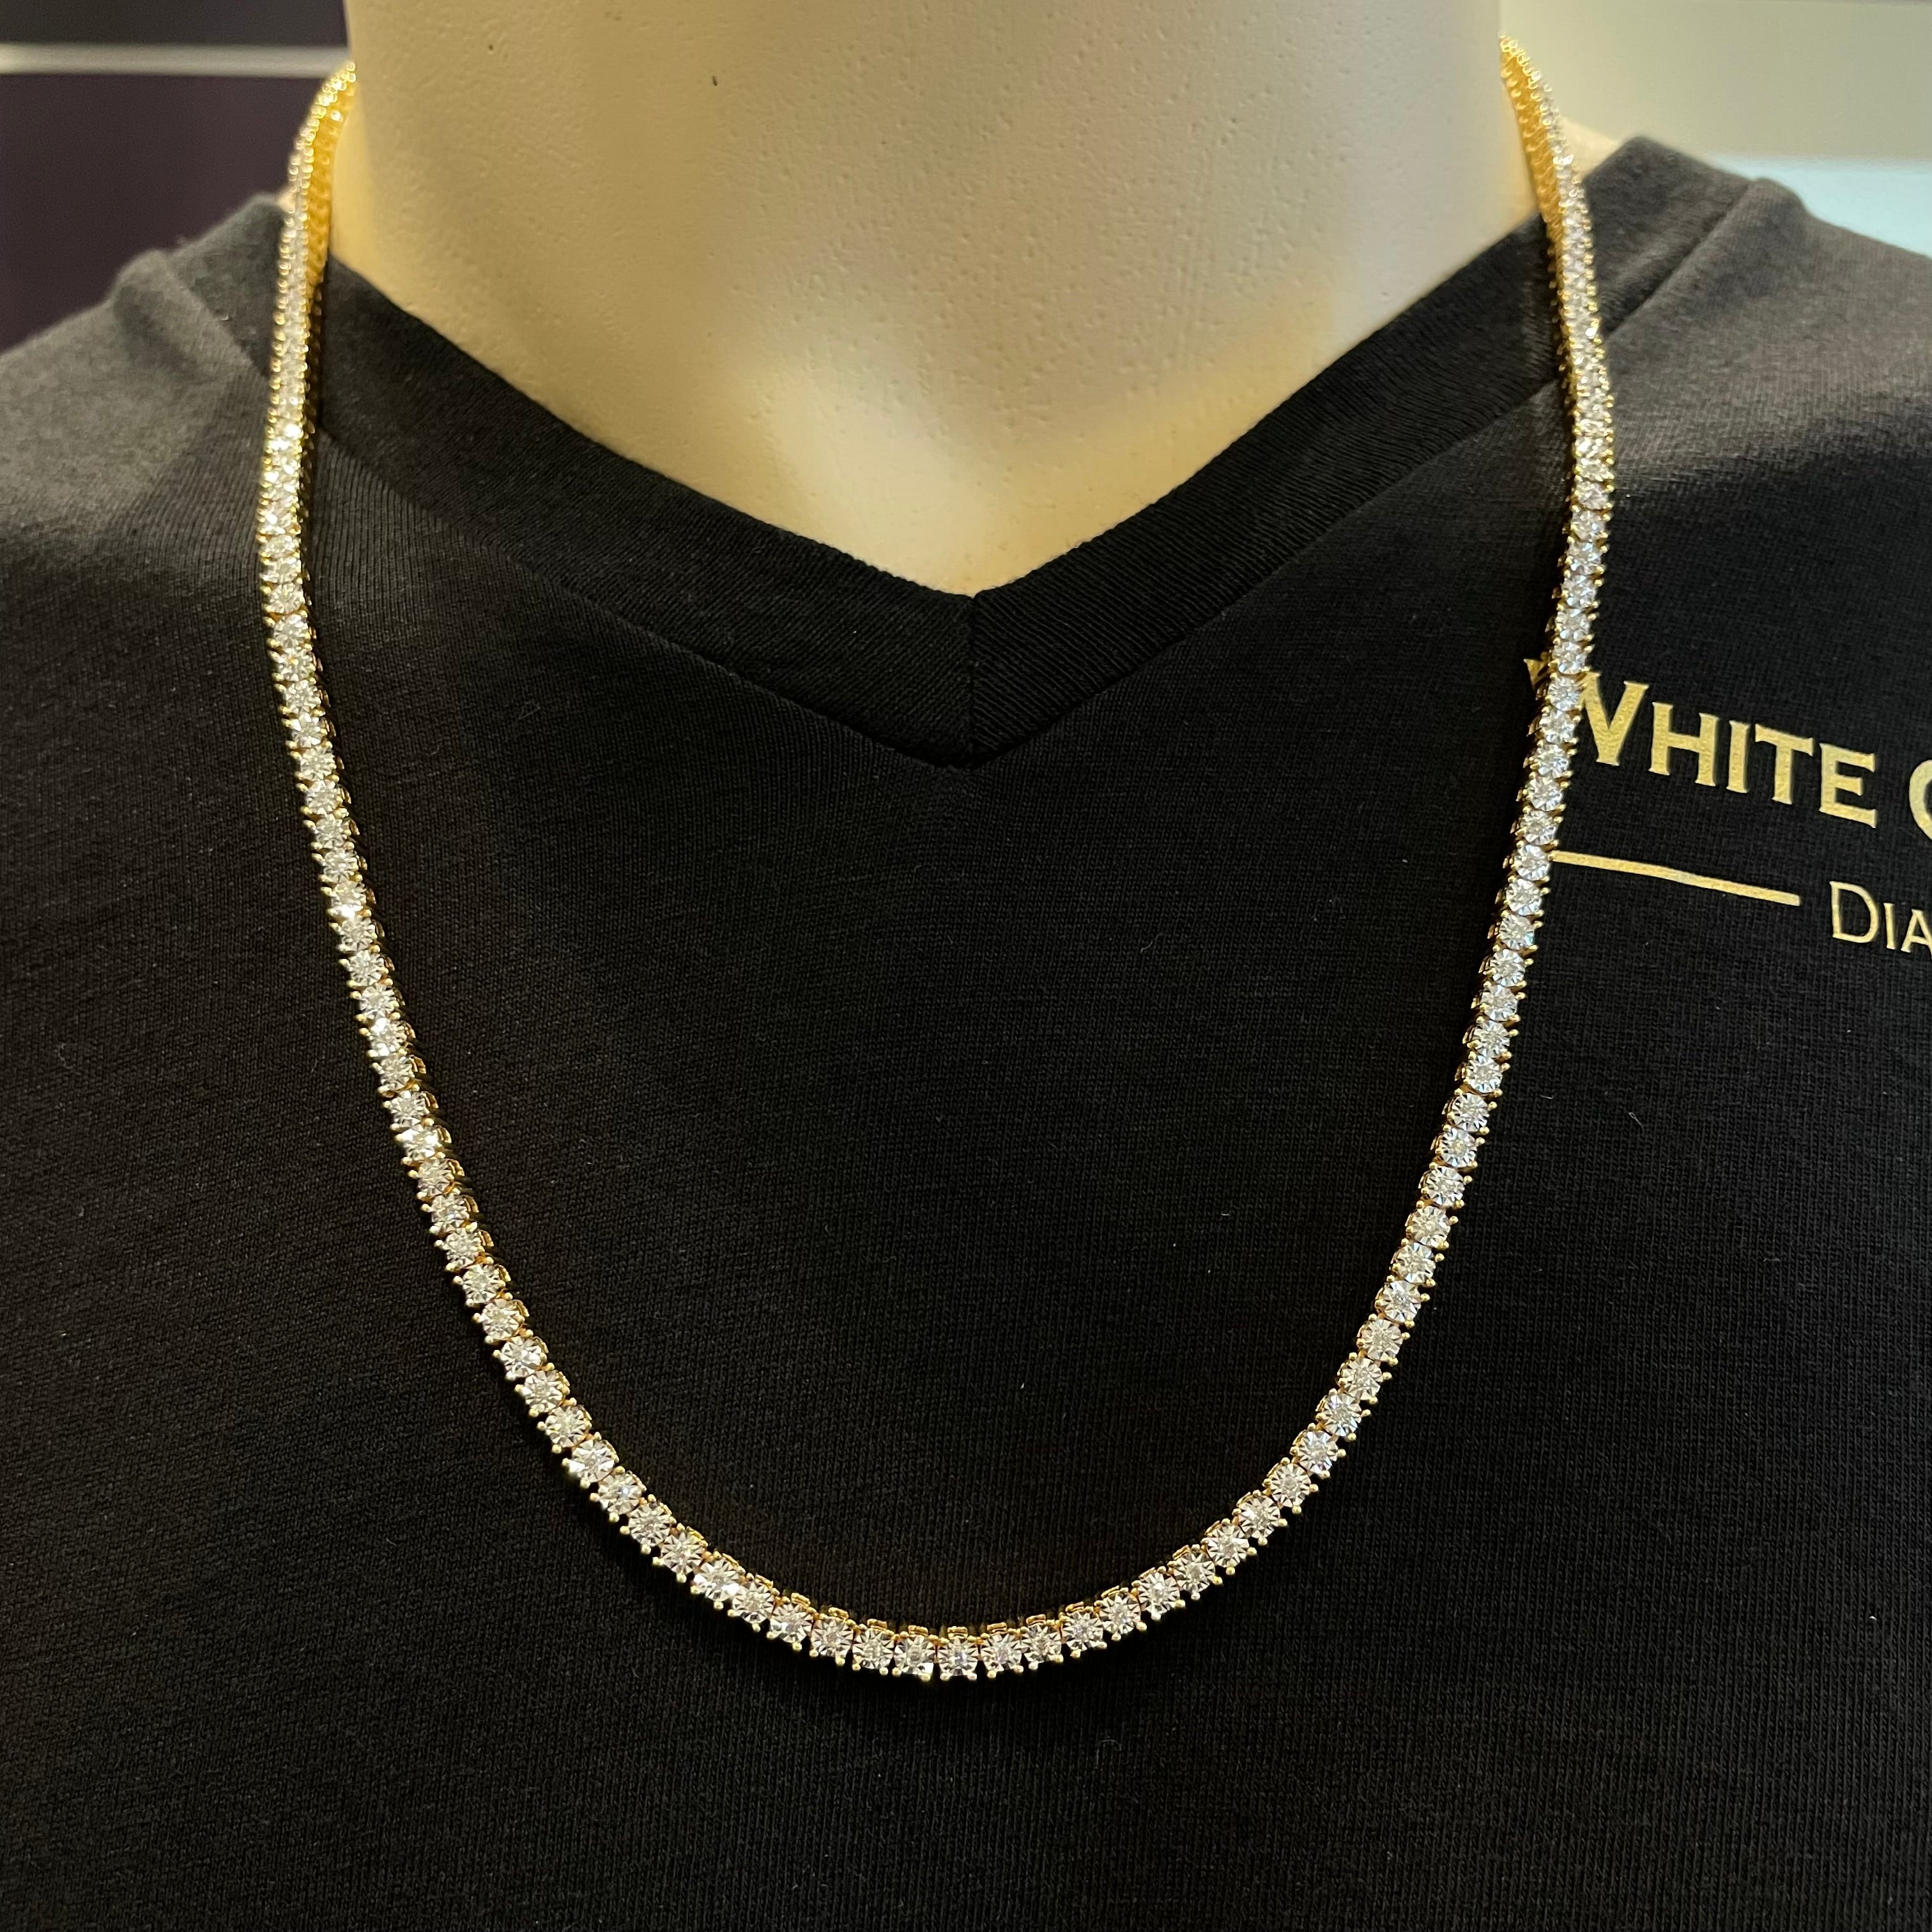 1.96 CT. Tennis Necklace in 10K Yellow Gold (4 Prong) - White Carat - USA & Canada